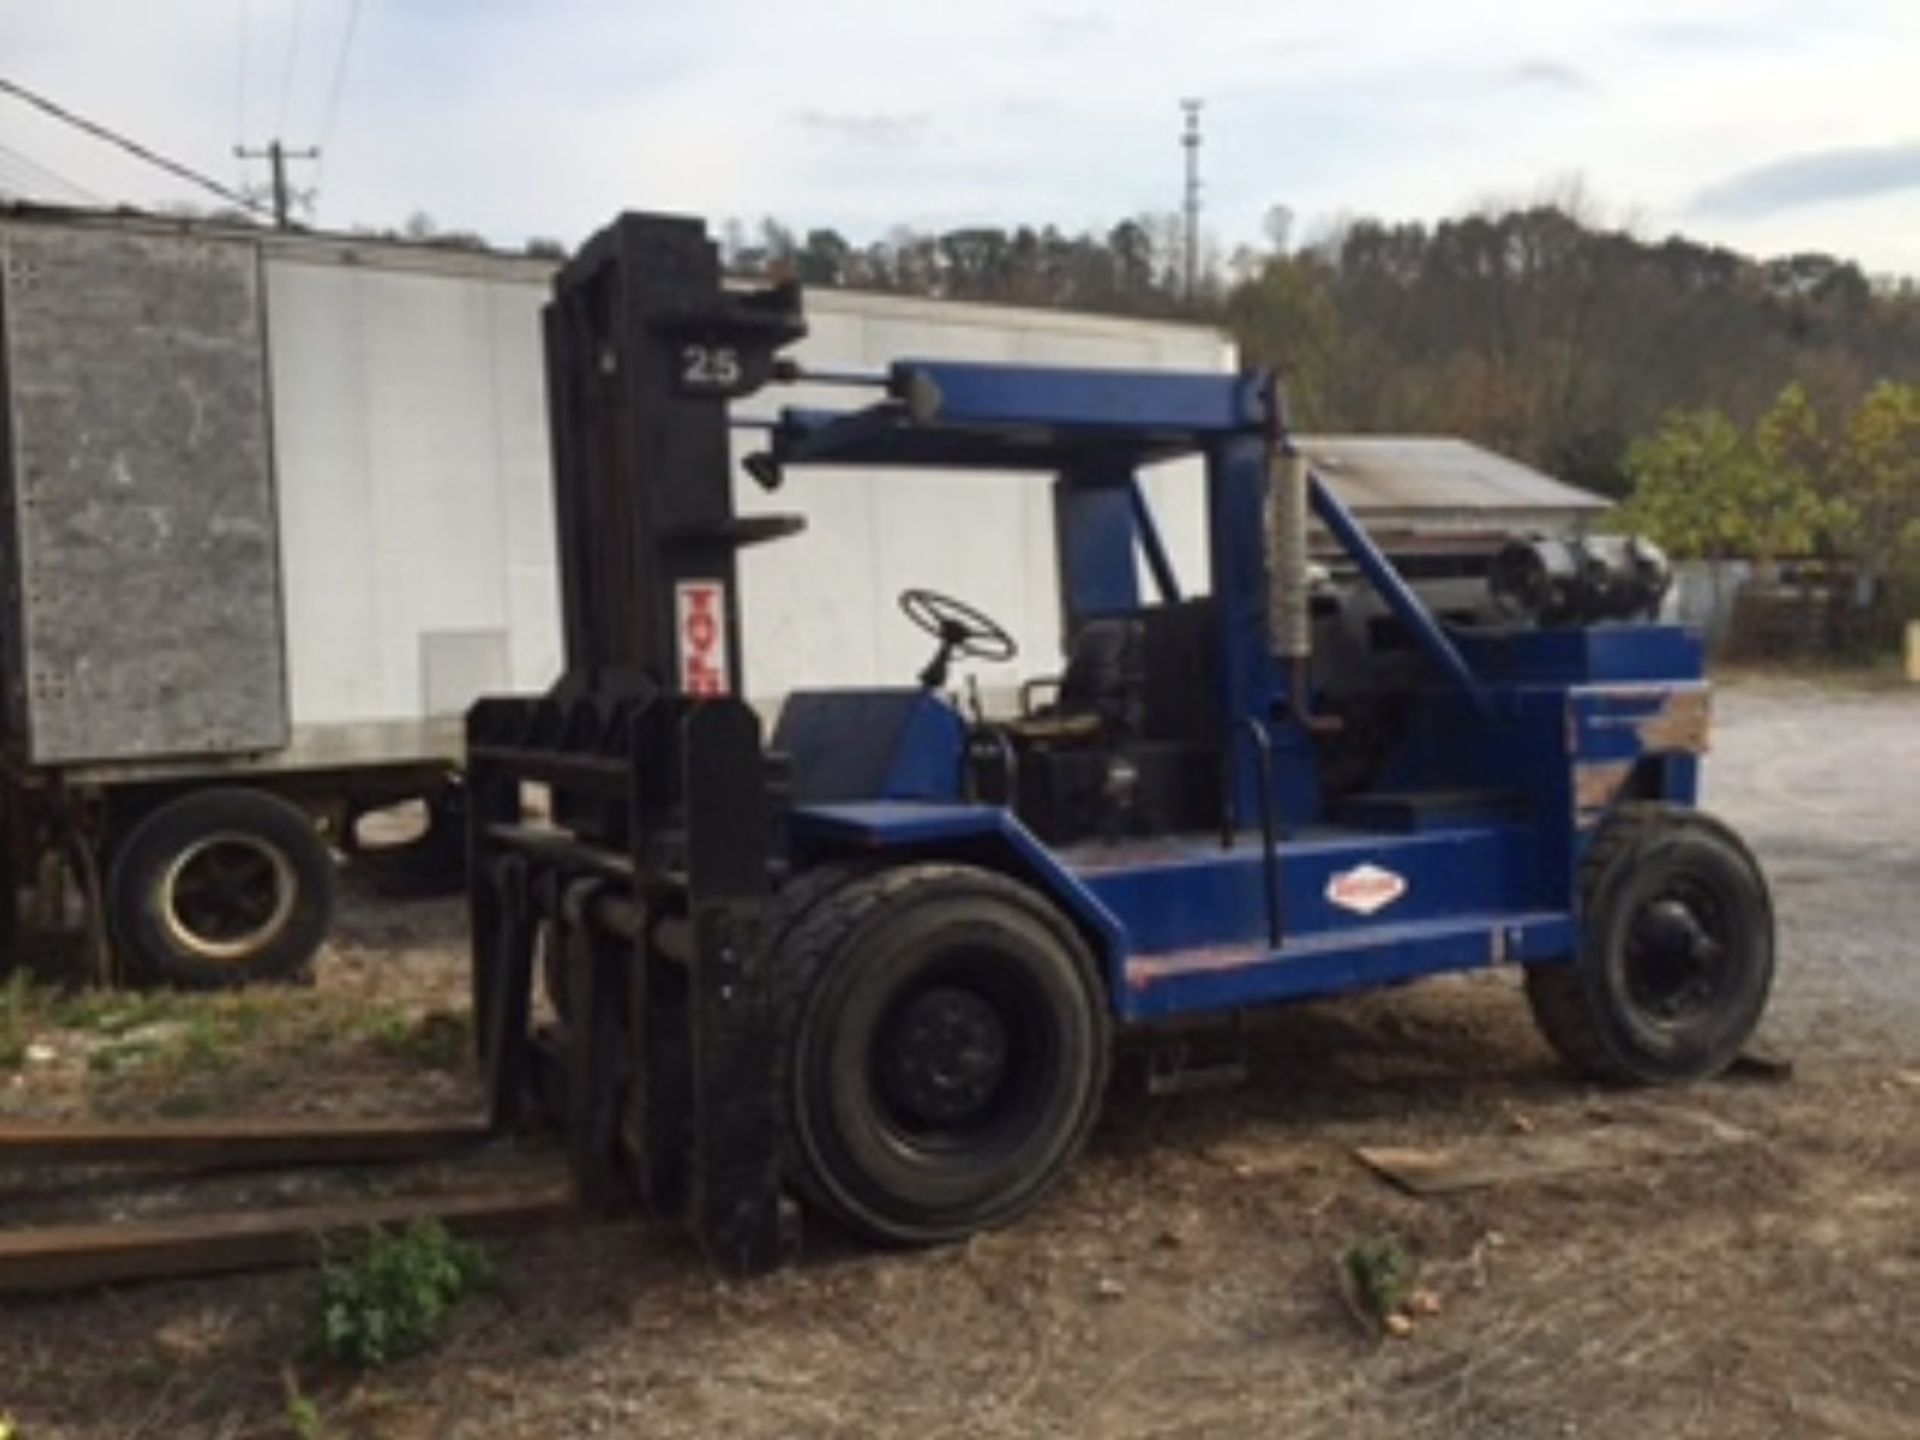 Taylor 40,000LB Forklift, LP Gas, 9' Lift, Cushion Tire, 351 Cleveland Ford Engine - Image 6 of 6